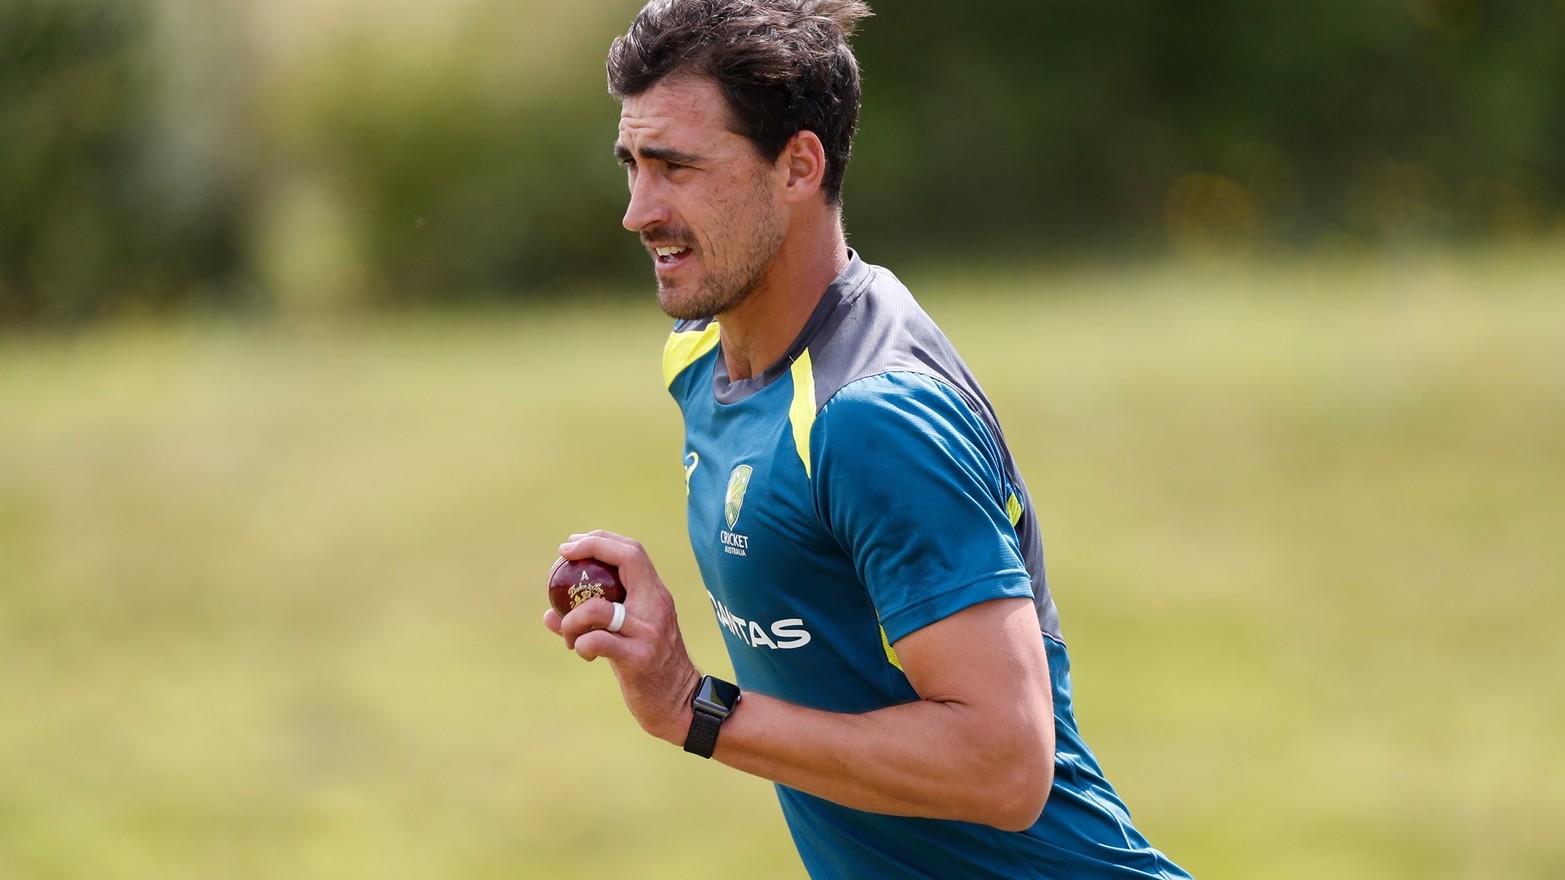 Mitchell Starc looking forward to get back to cricket post the COVID-19 pandemic